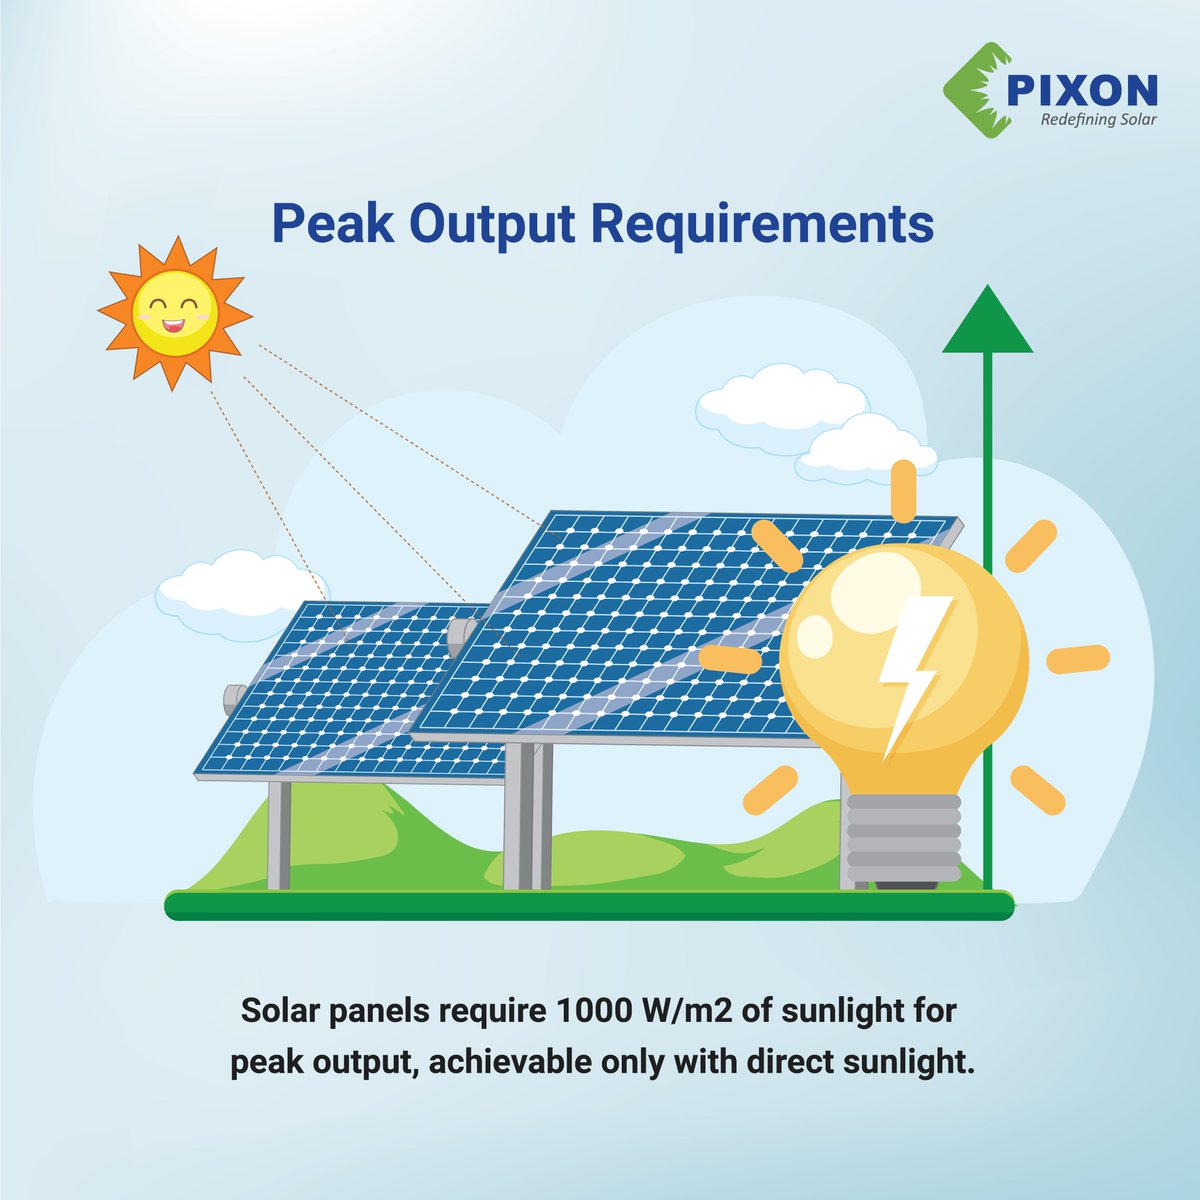 Discover the power of sunlight!
Learn how solar panels adapt to light conditions for maximum efficiency.

#pixonenergy #sunlight #solarpower #solarmodules #solarpanels #solarenergy #solar #electricity #photons #electriccurrent #sun #efficiency #performance #output